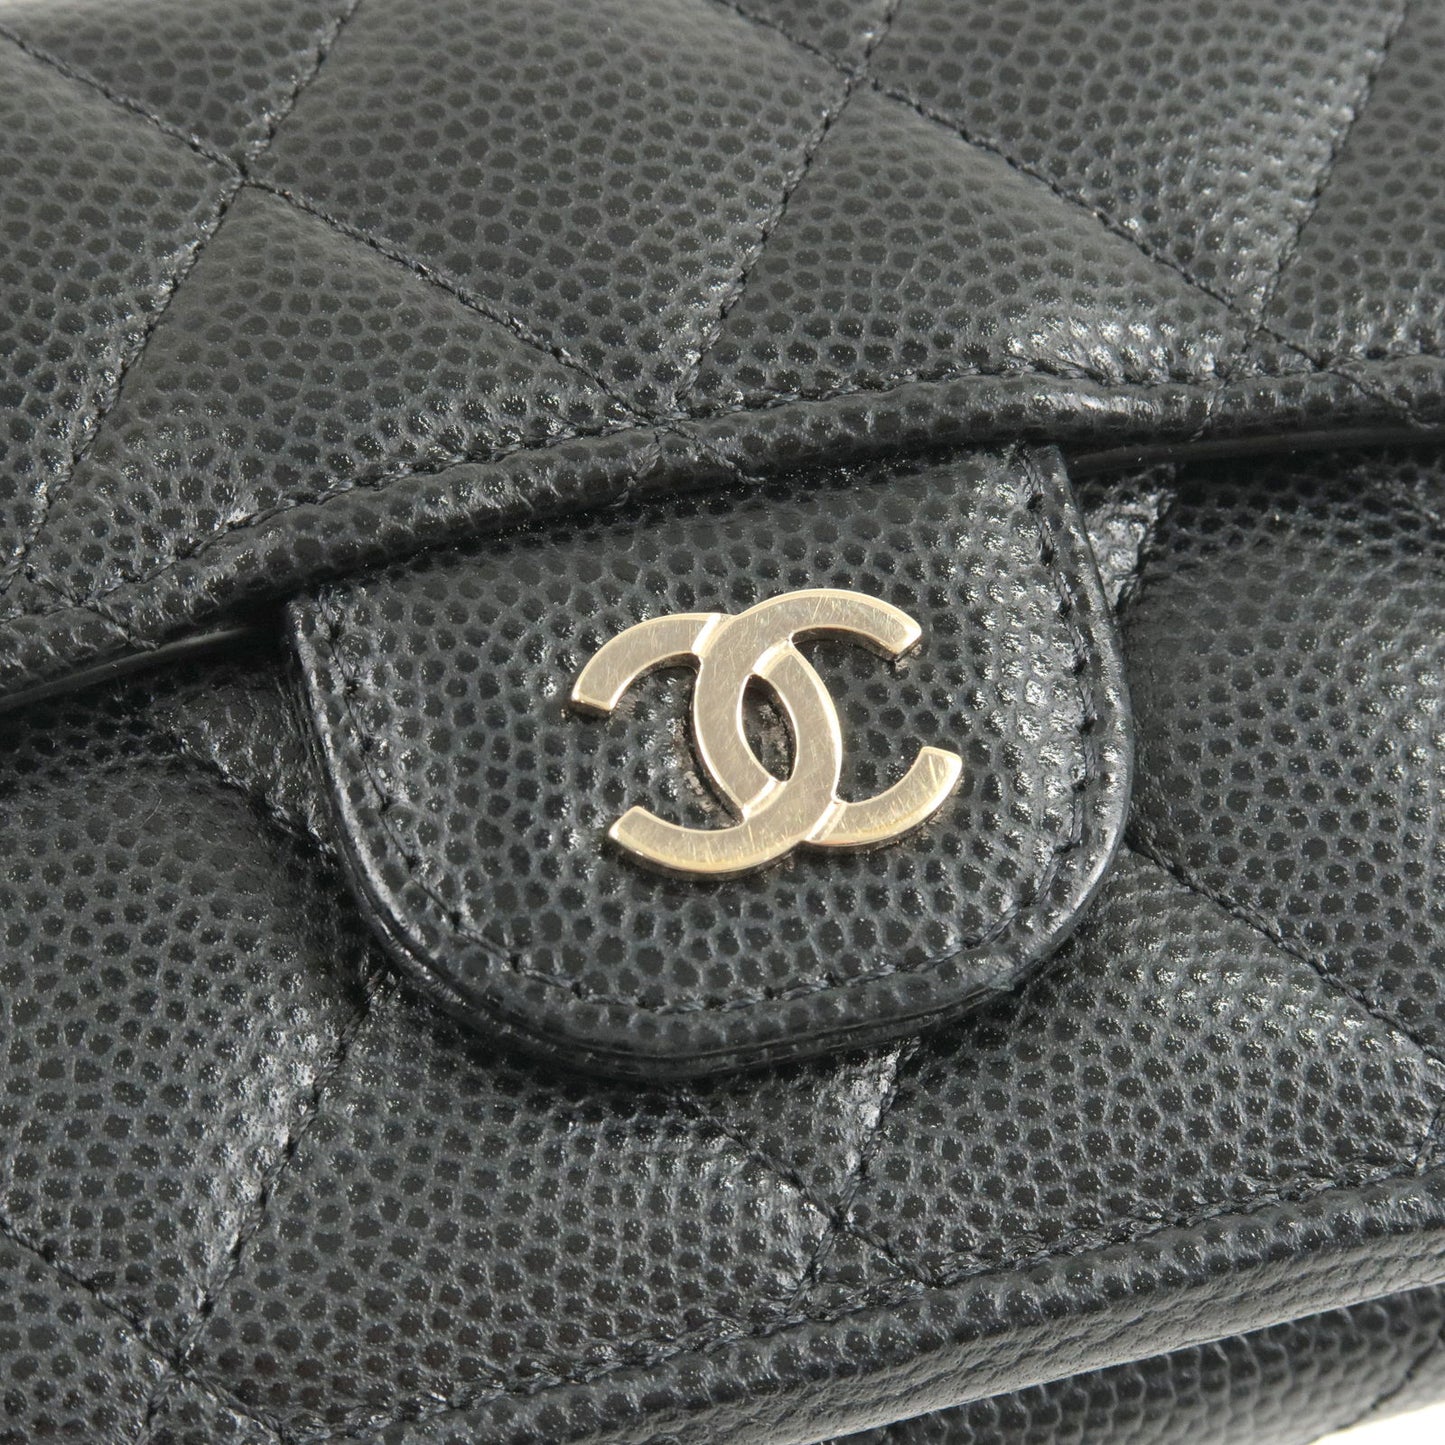 CHANEL Green Wallets for Women for sale